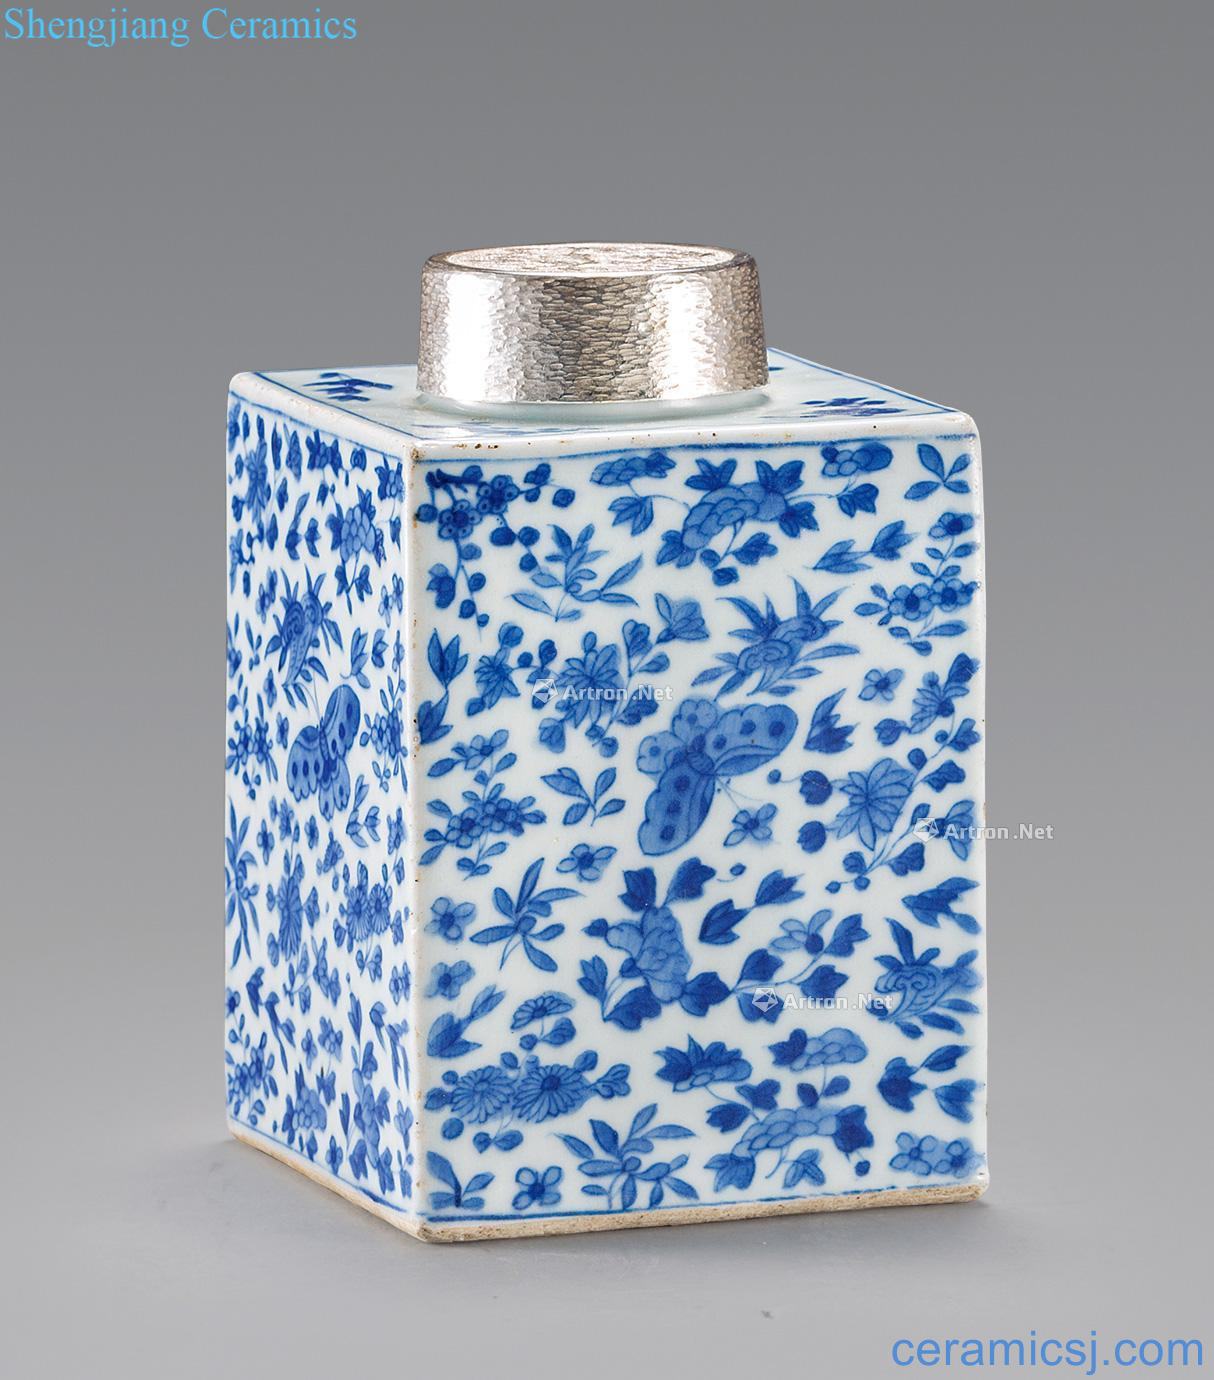 Qing dynasty blue and white flower grain caddy